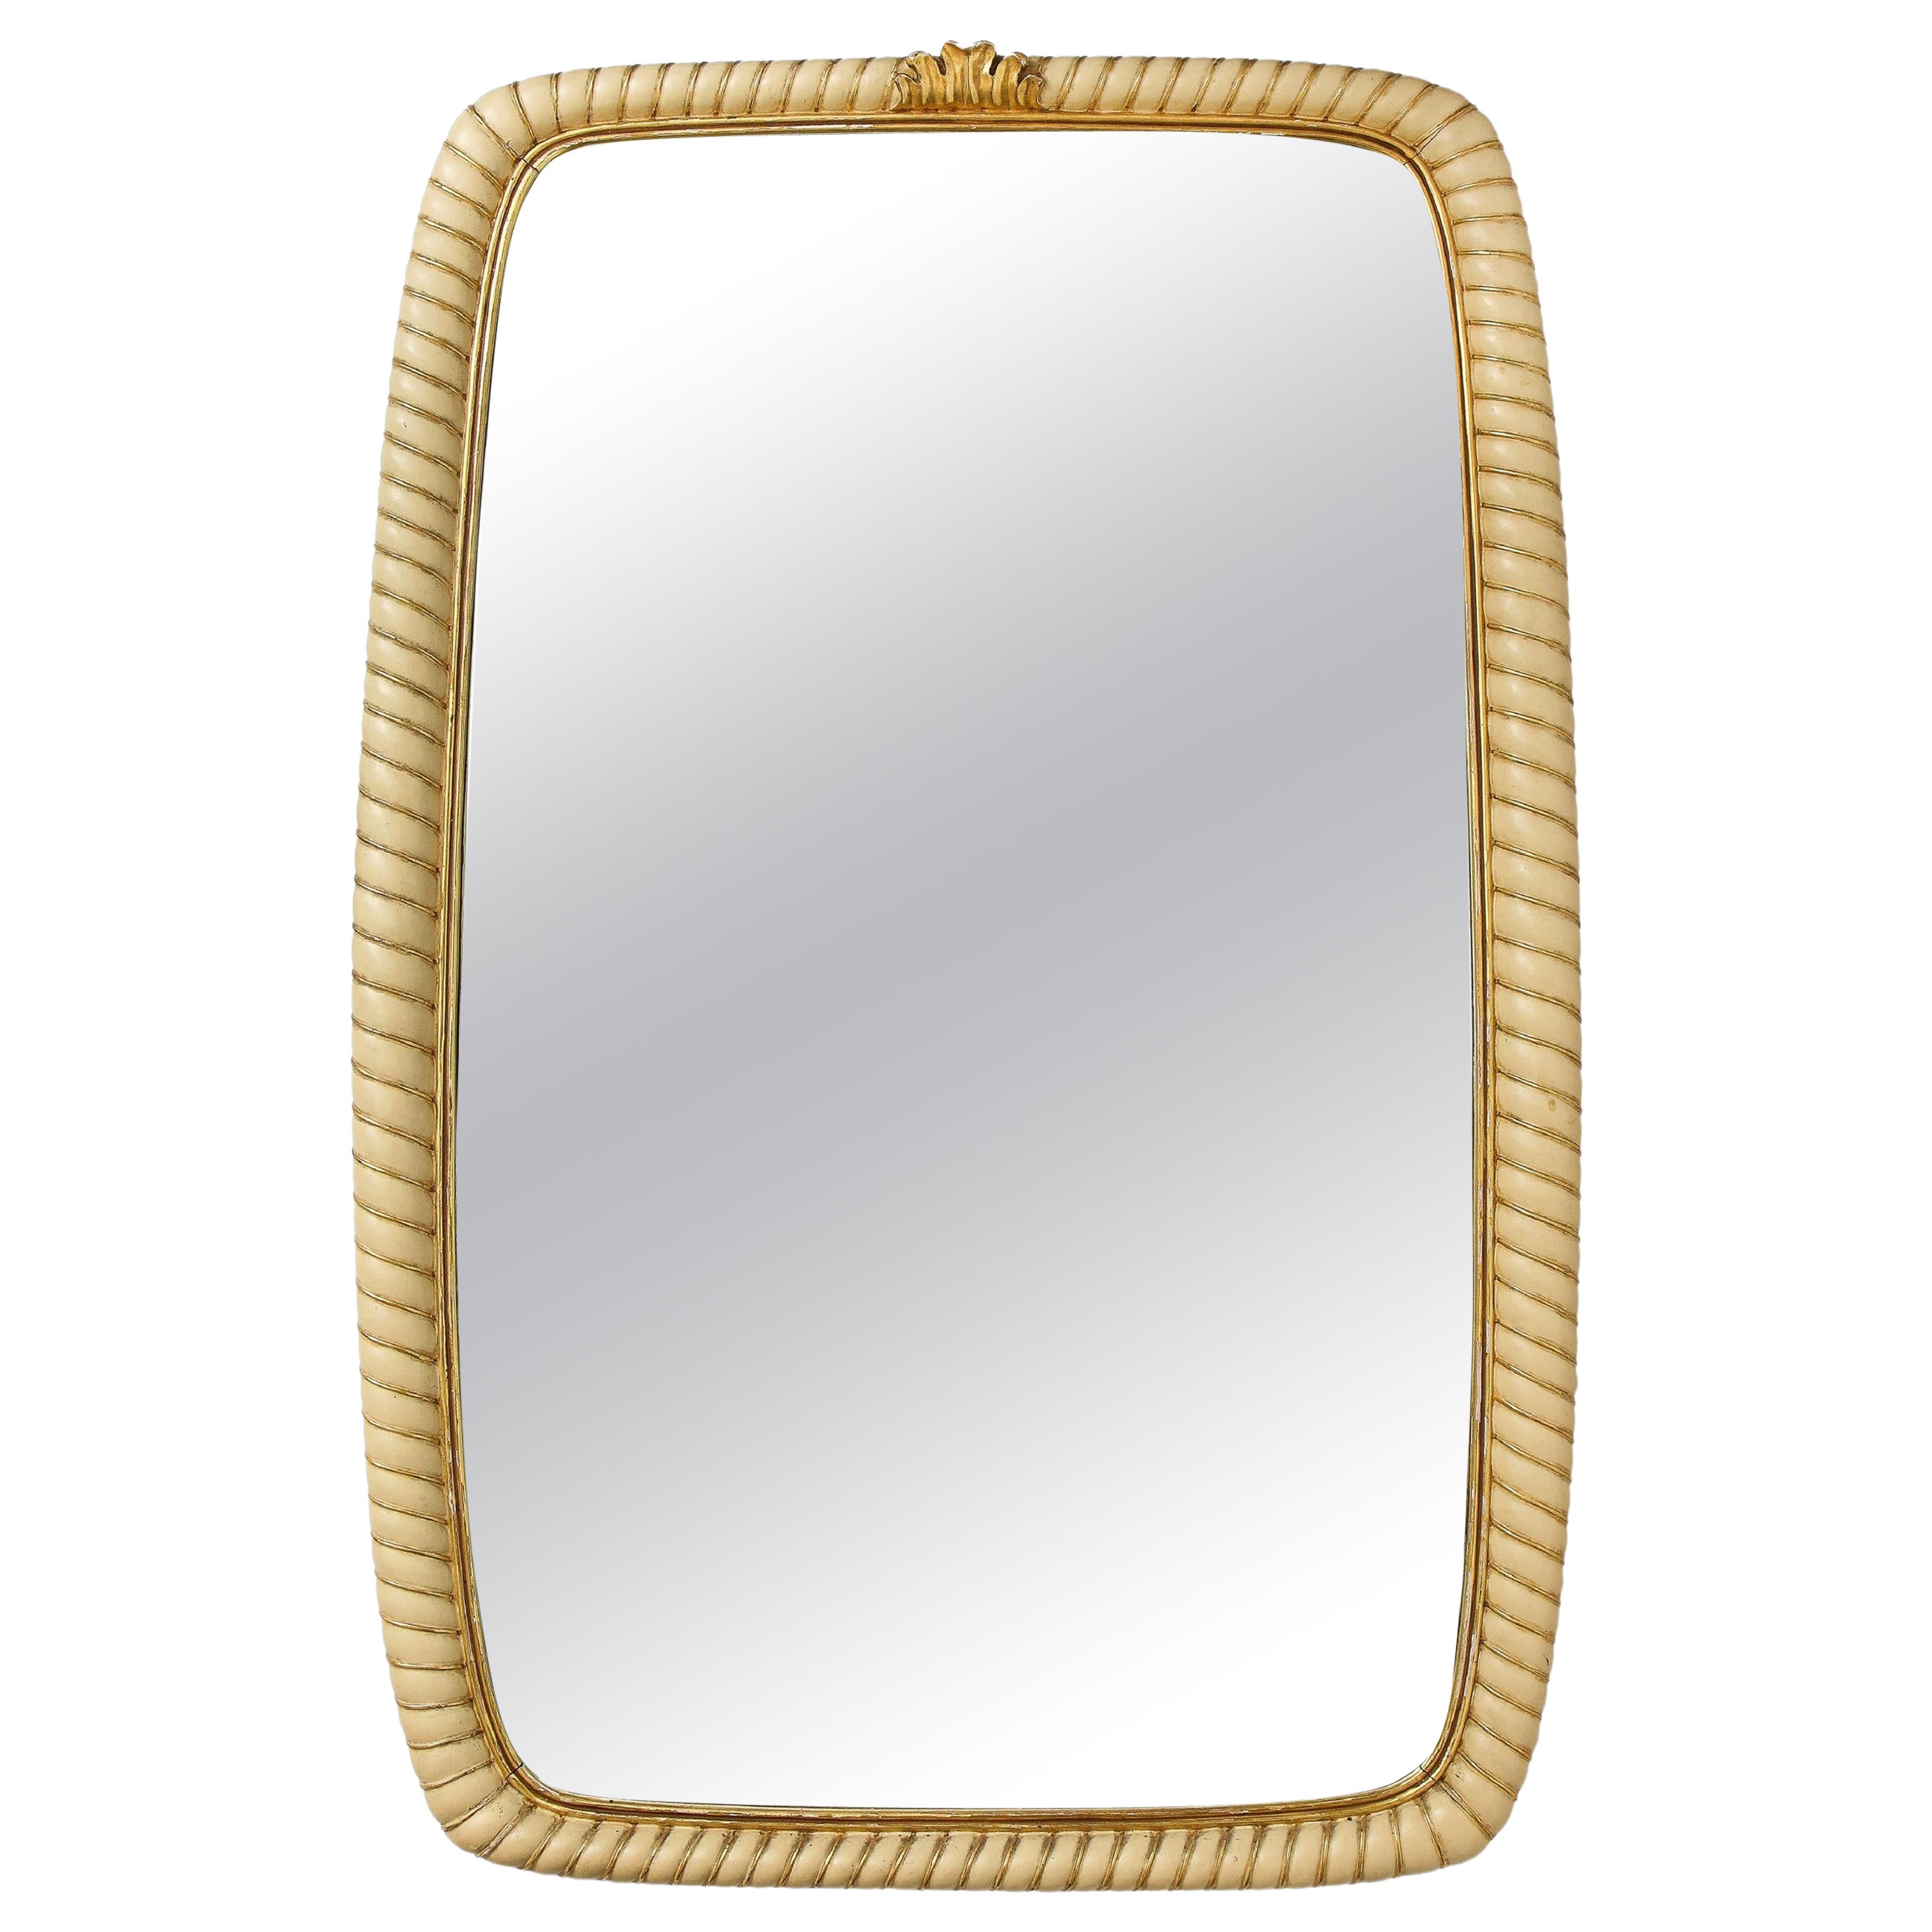 Osvaldo Borsani Rare Large Ivory Painted and Gilded Wood Mirror, Italy, 1940s For Sale